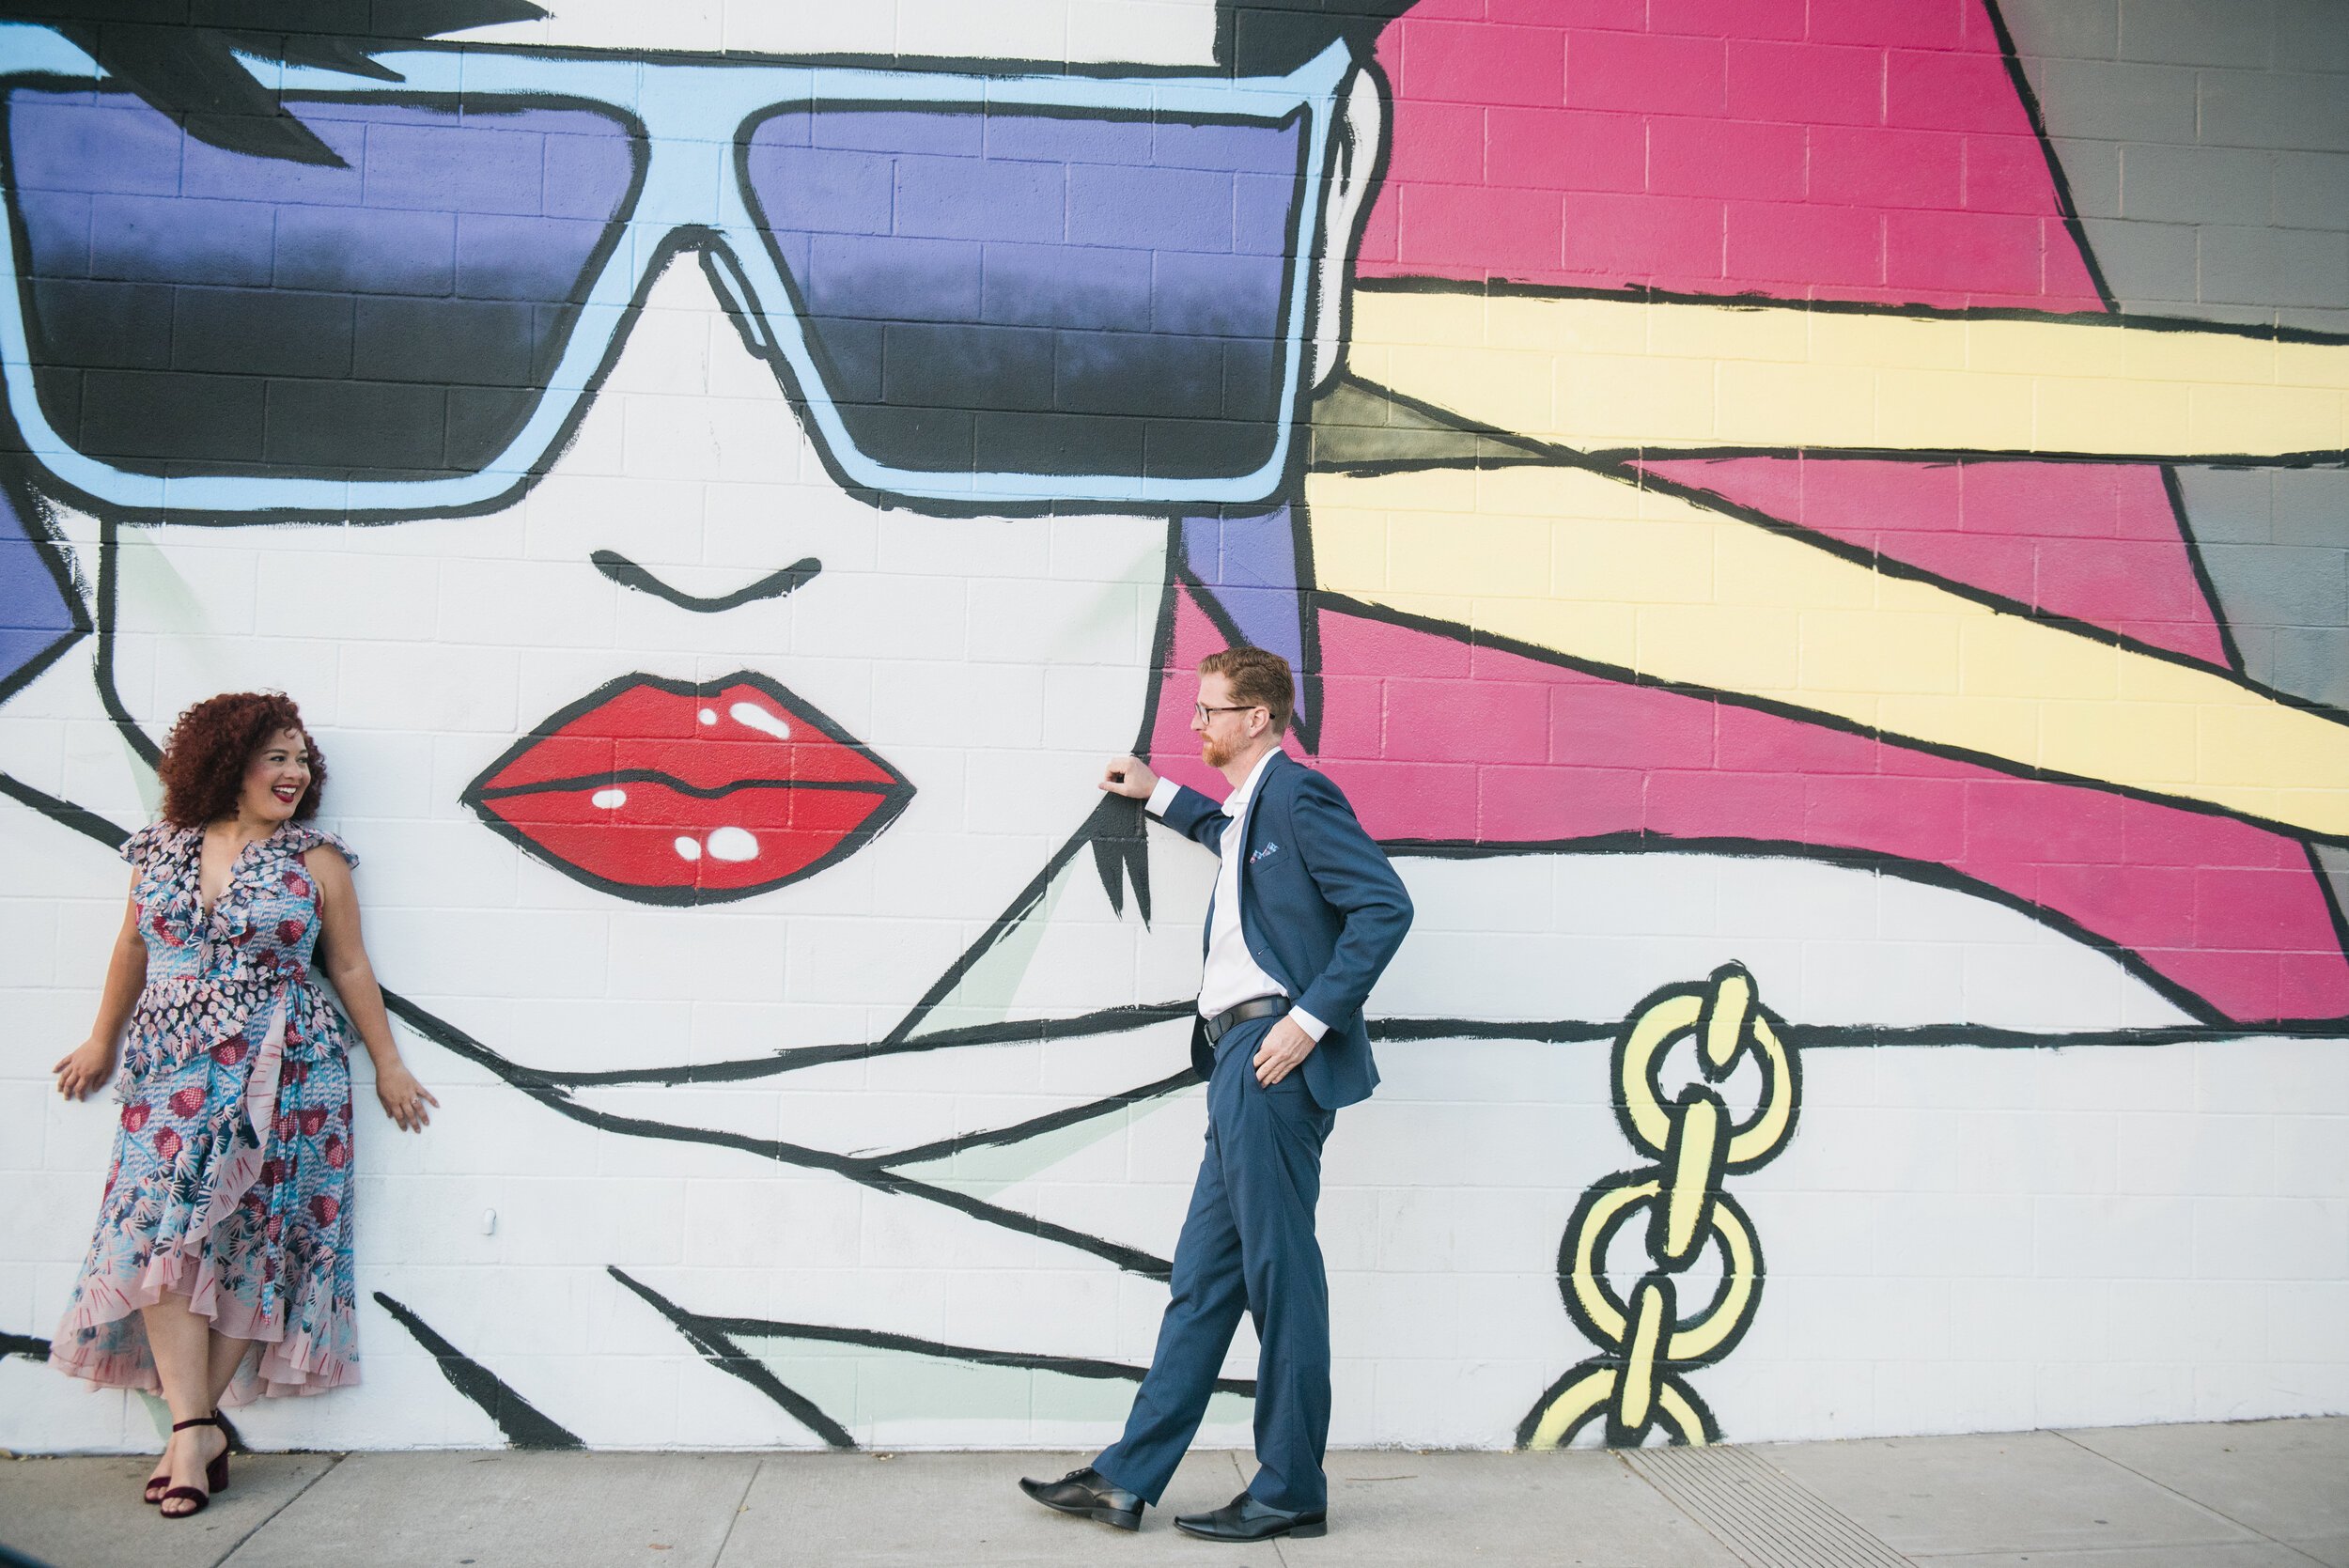 www.santabarbarawedding.com | ByCherry Photography | The Funk Zone | The Couple in Front of a Graffiti Wall Background